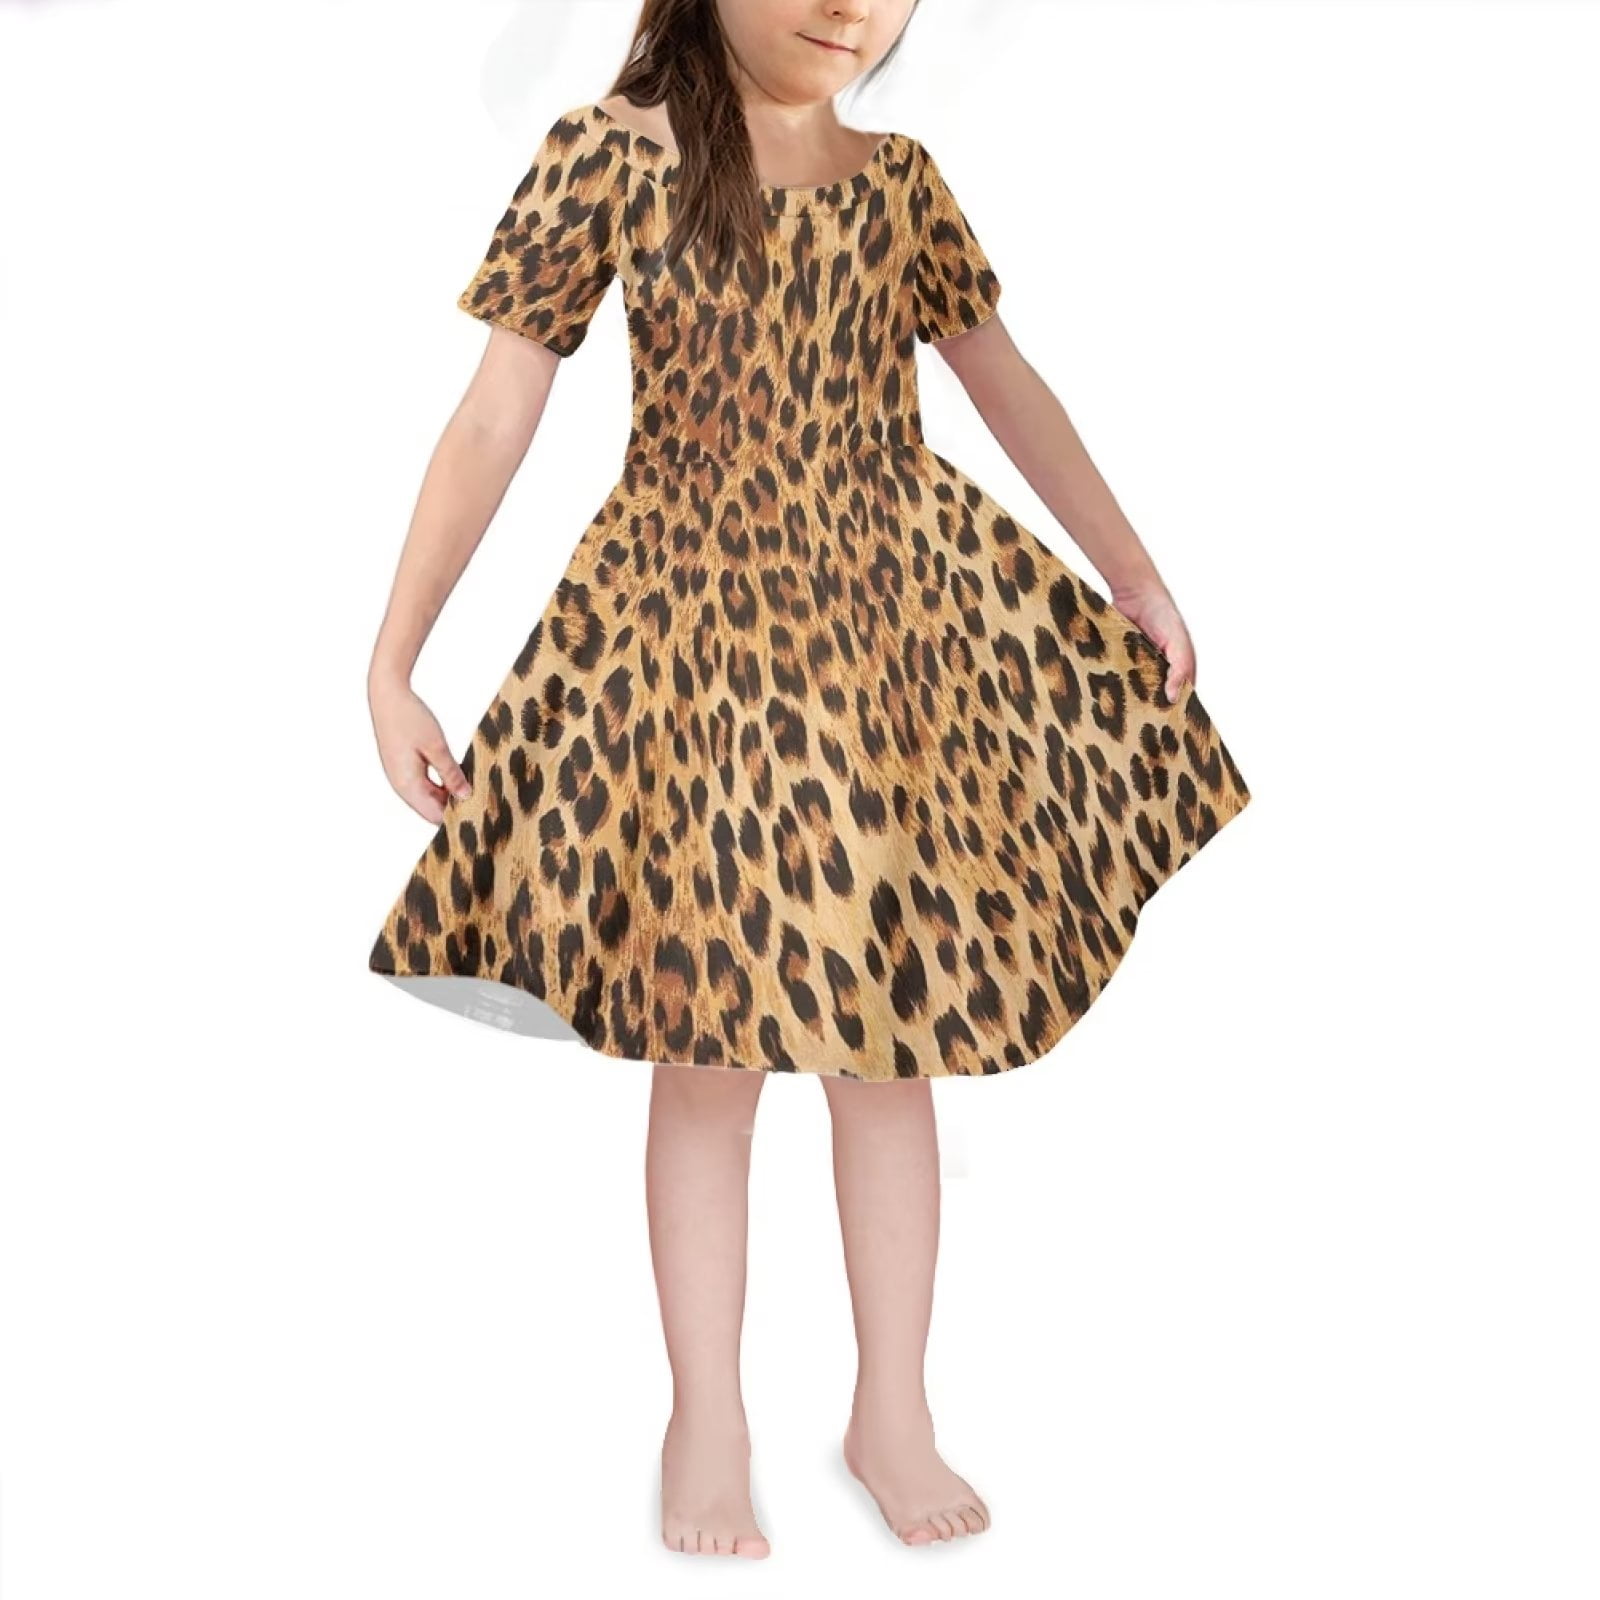 Girls Dress with Classic Leopard Print Size 9-10 Years Comfy School Knee Length Home Kids Girls Skater Dress -